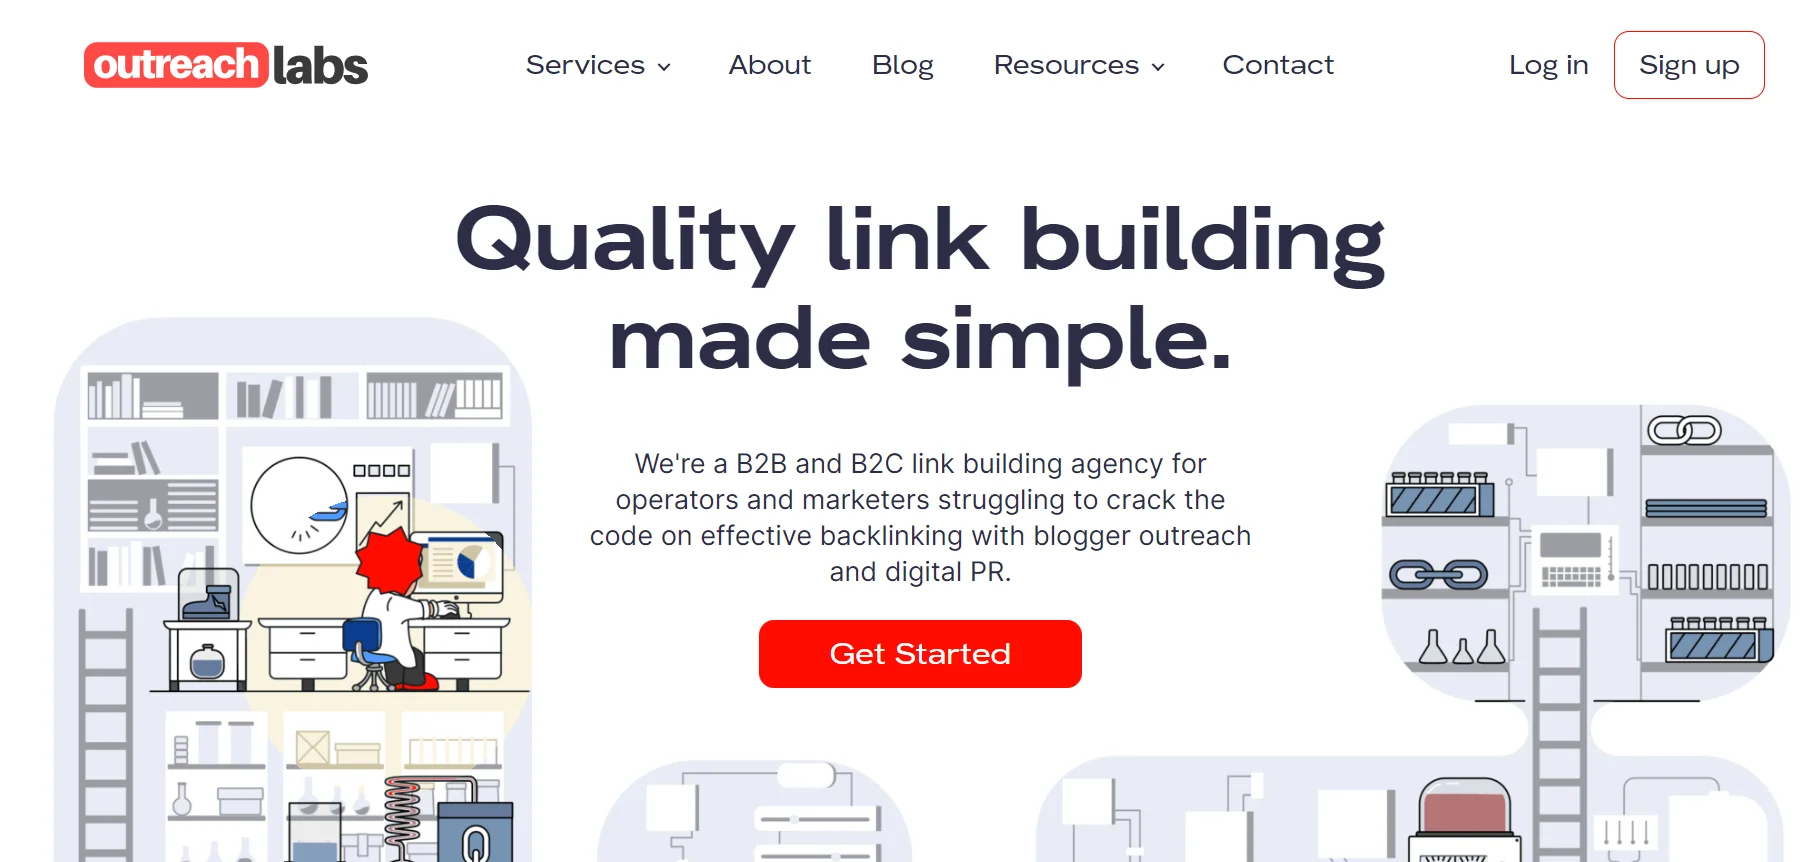 OutreachLabs is a hassle-free solution to quality link building, catering to both B2B and B2C sectors.